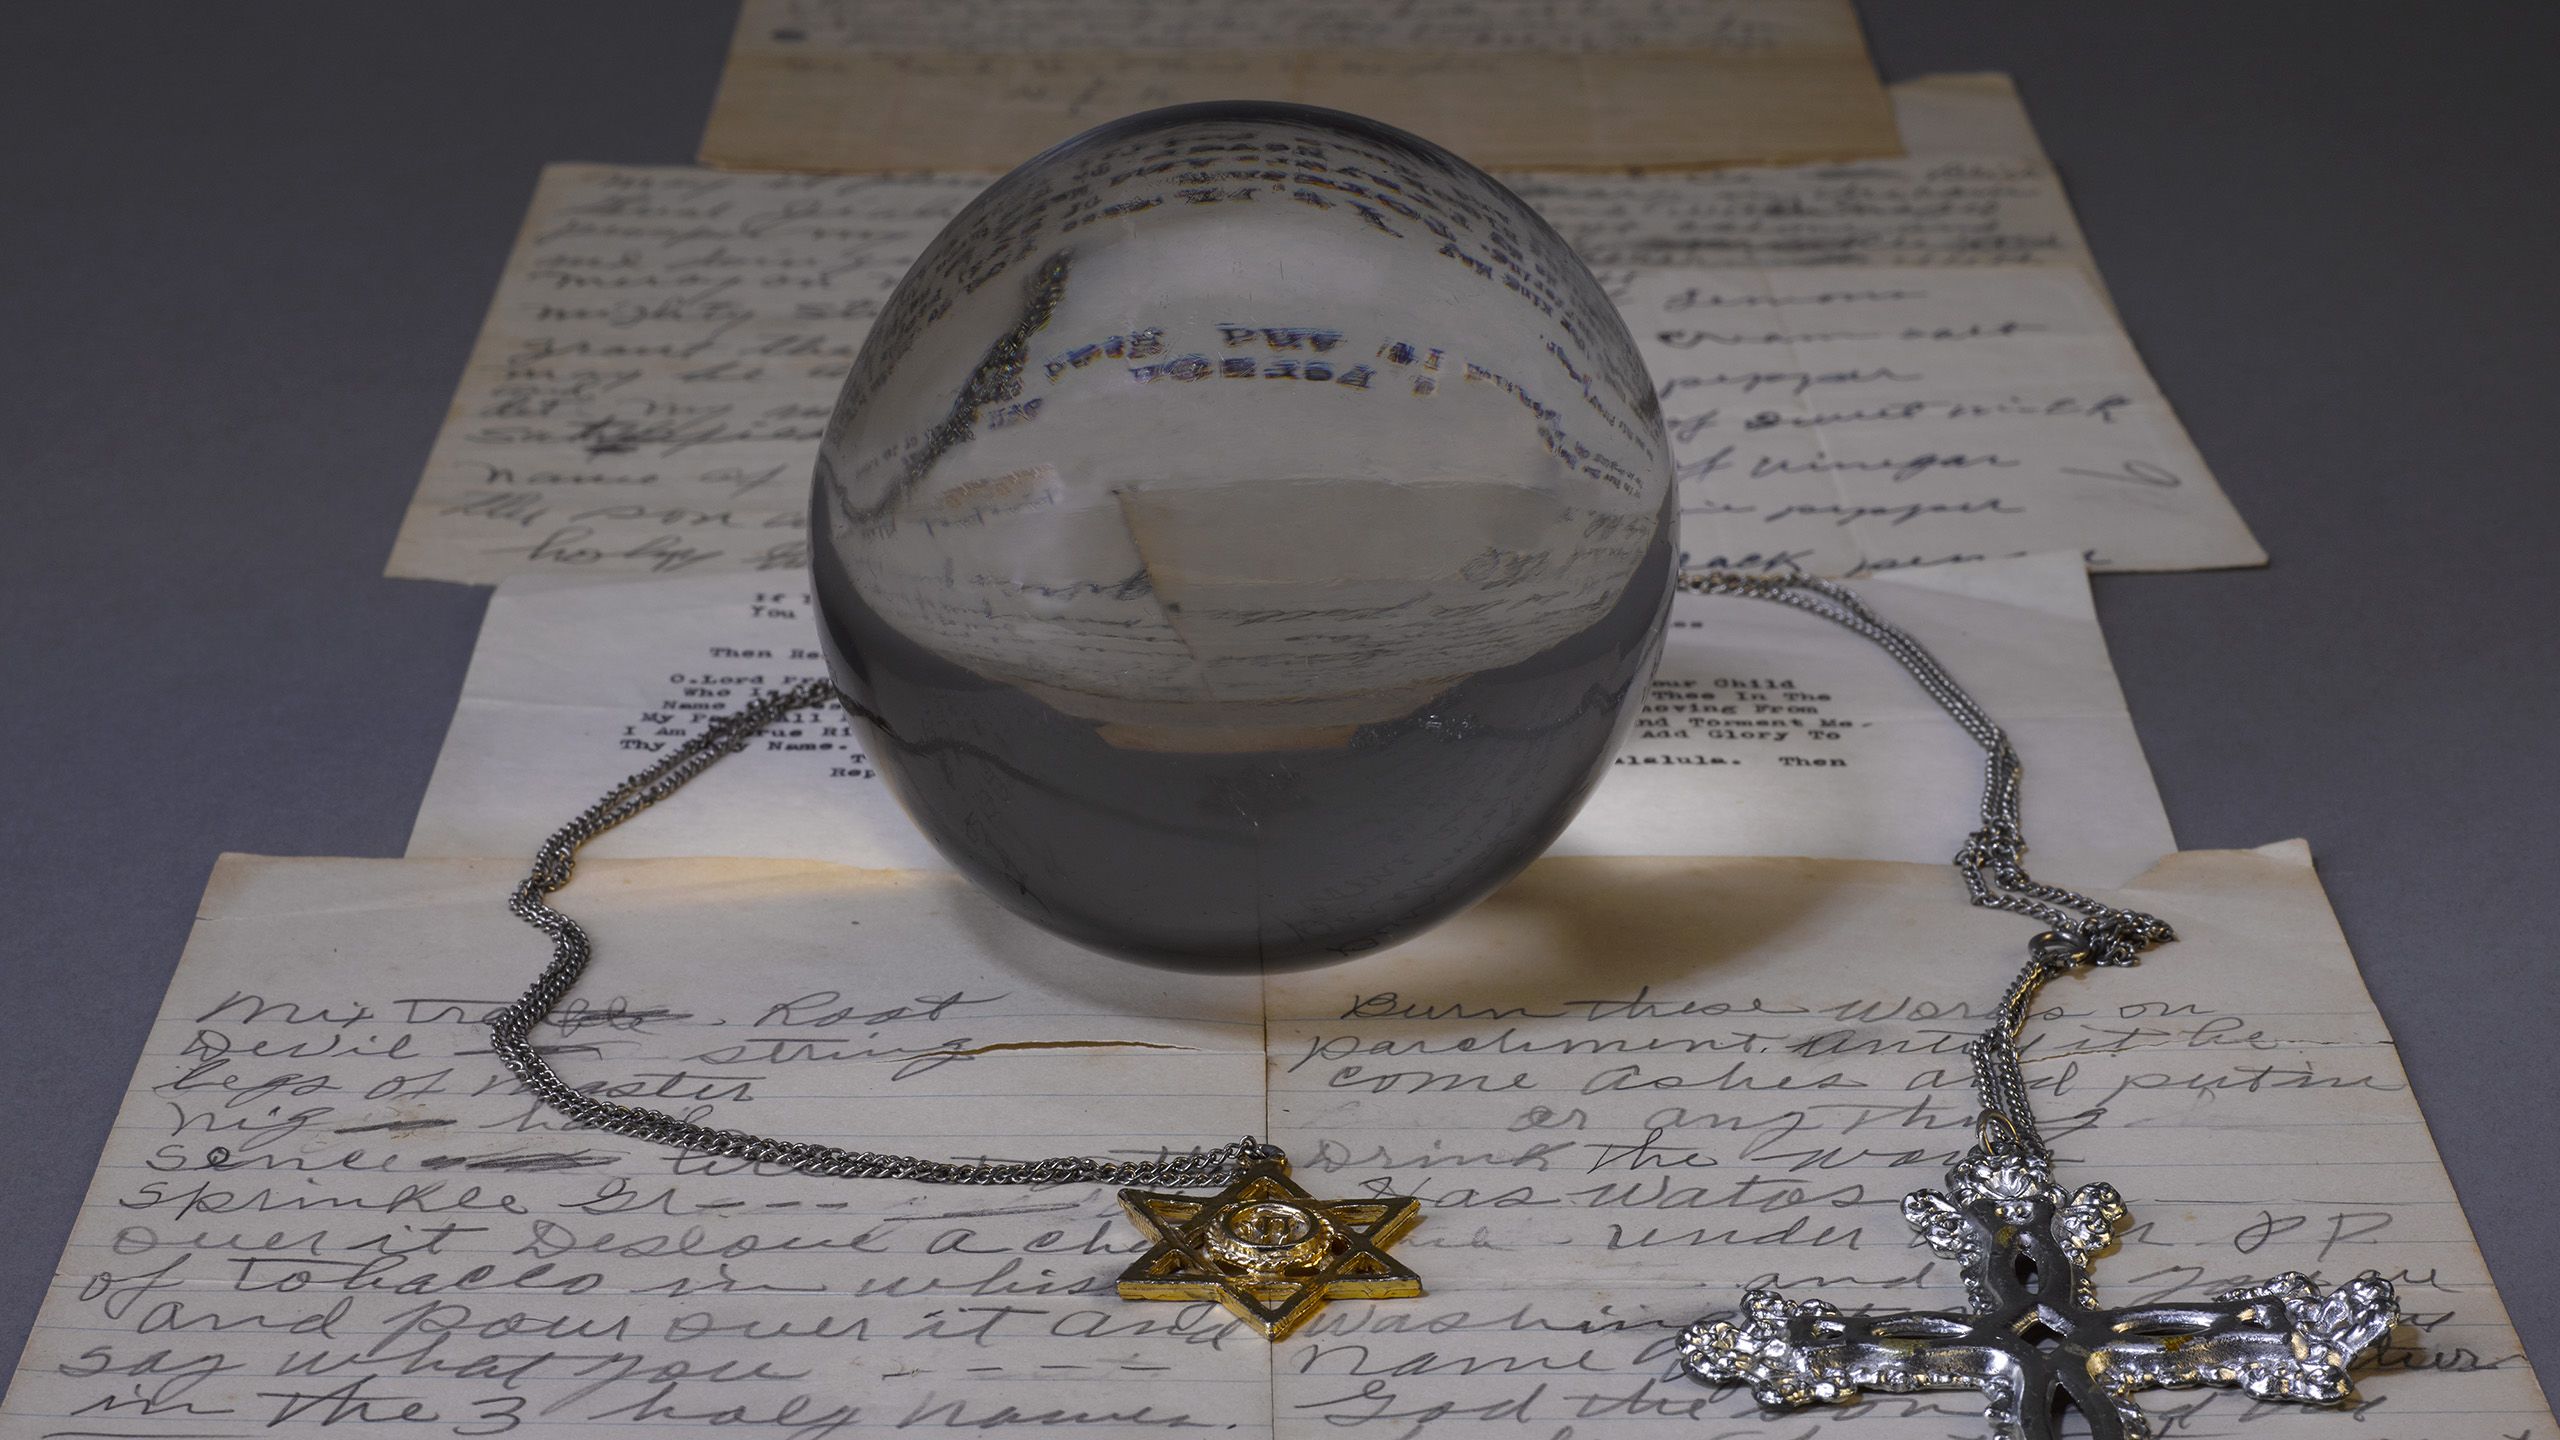 A crystal ball sitting on top of pages of spells